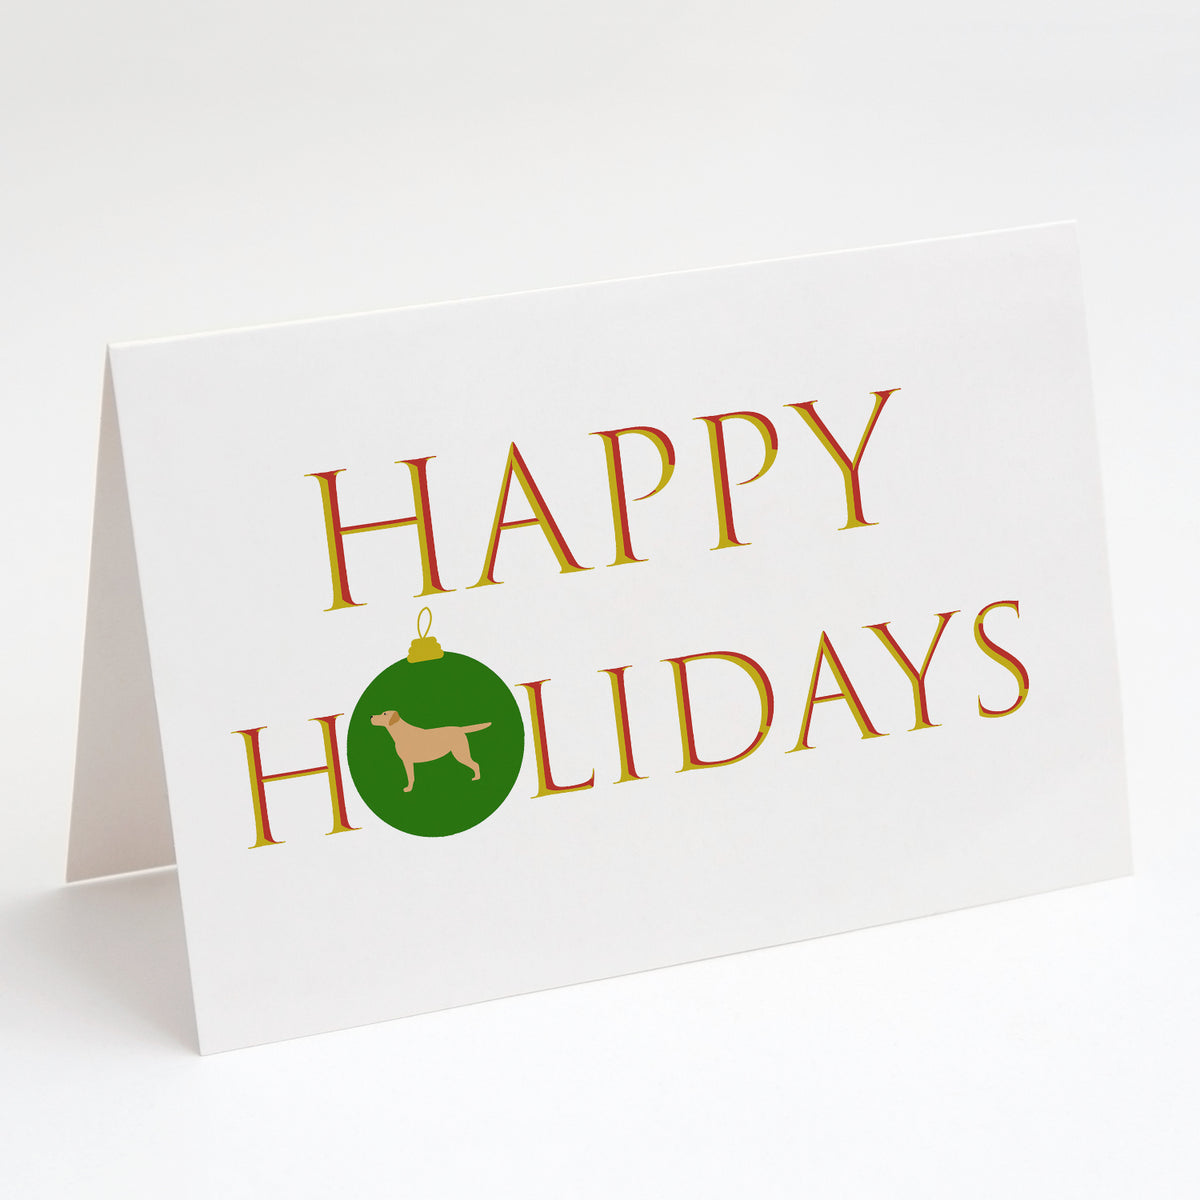 Buy this Yellow Labrador Retriever Happy Holidays Greeting Cards and Envelopes Pack of 8